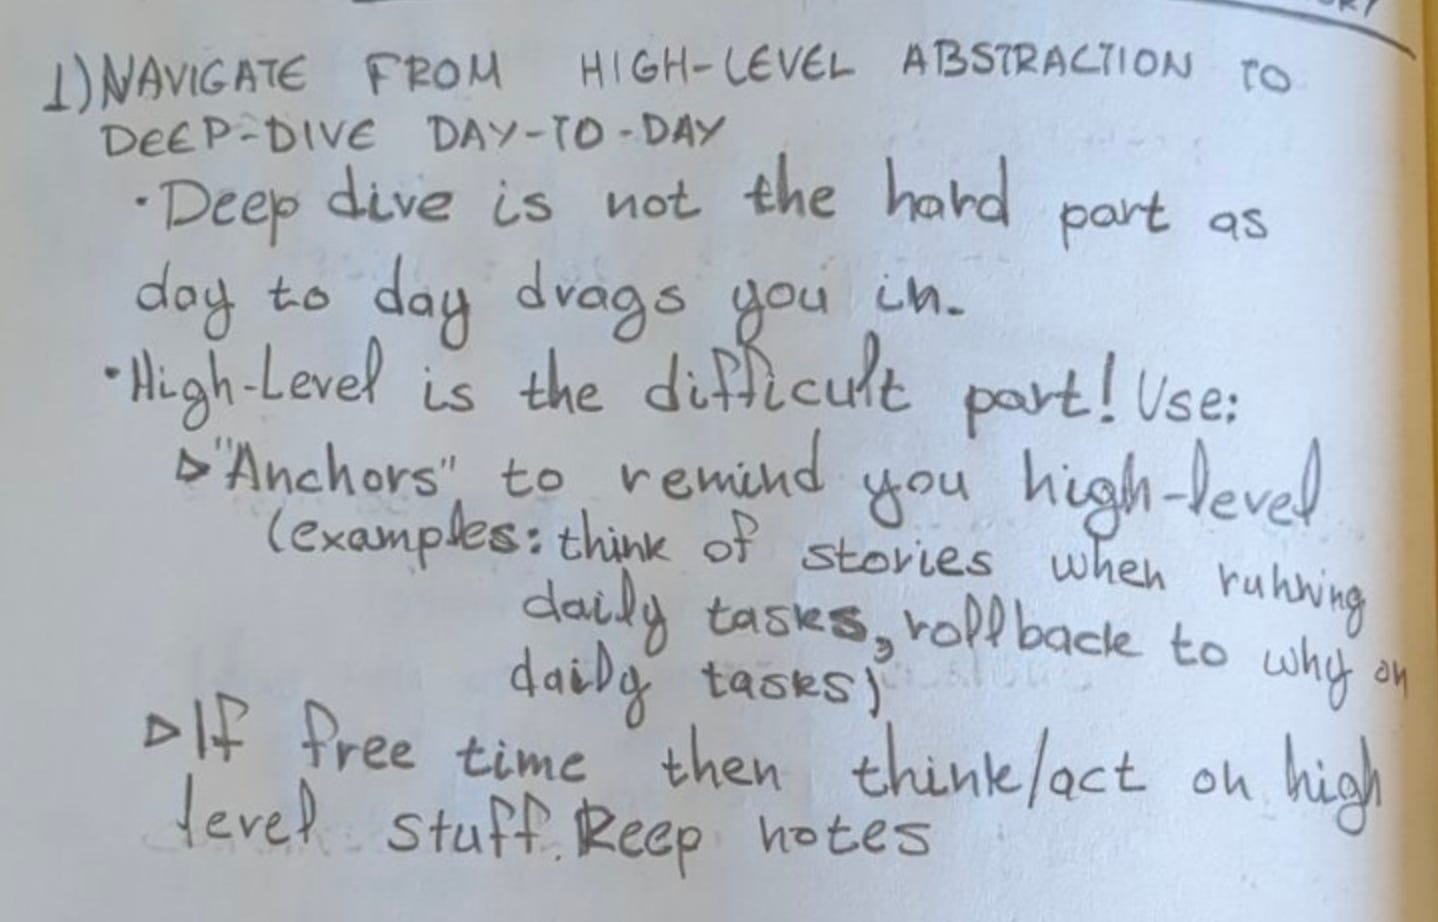 Handwritten notes on "Navigate from High-level abstraction  to deep dive day-to-day